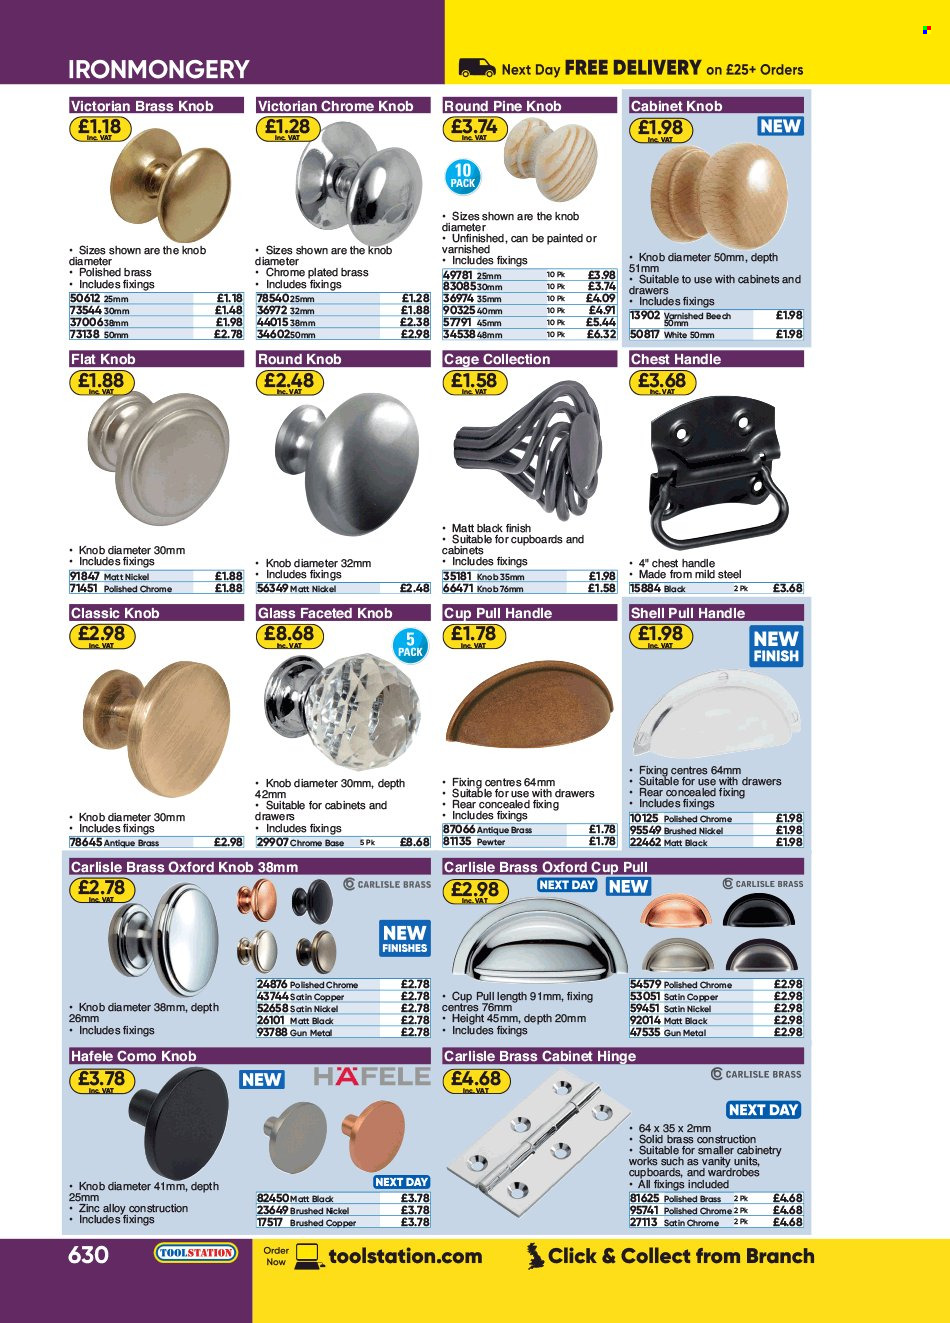 Toolstation offer . Page 630.